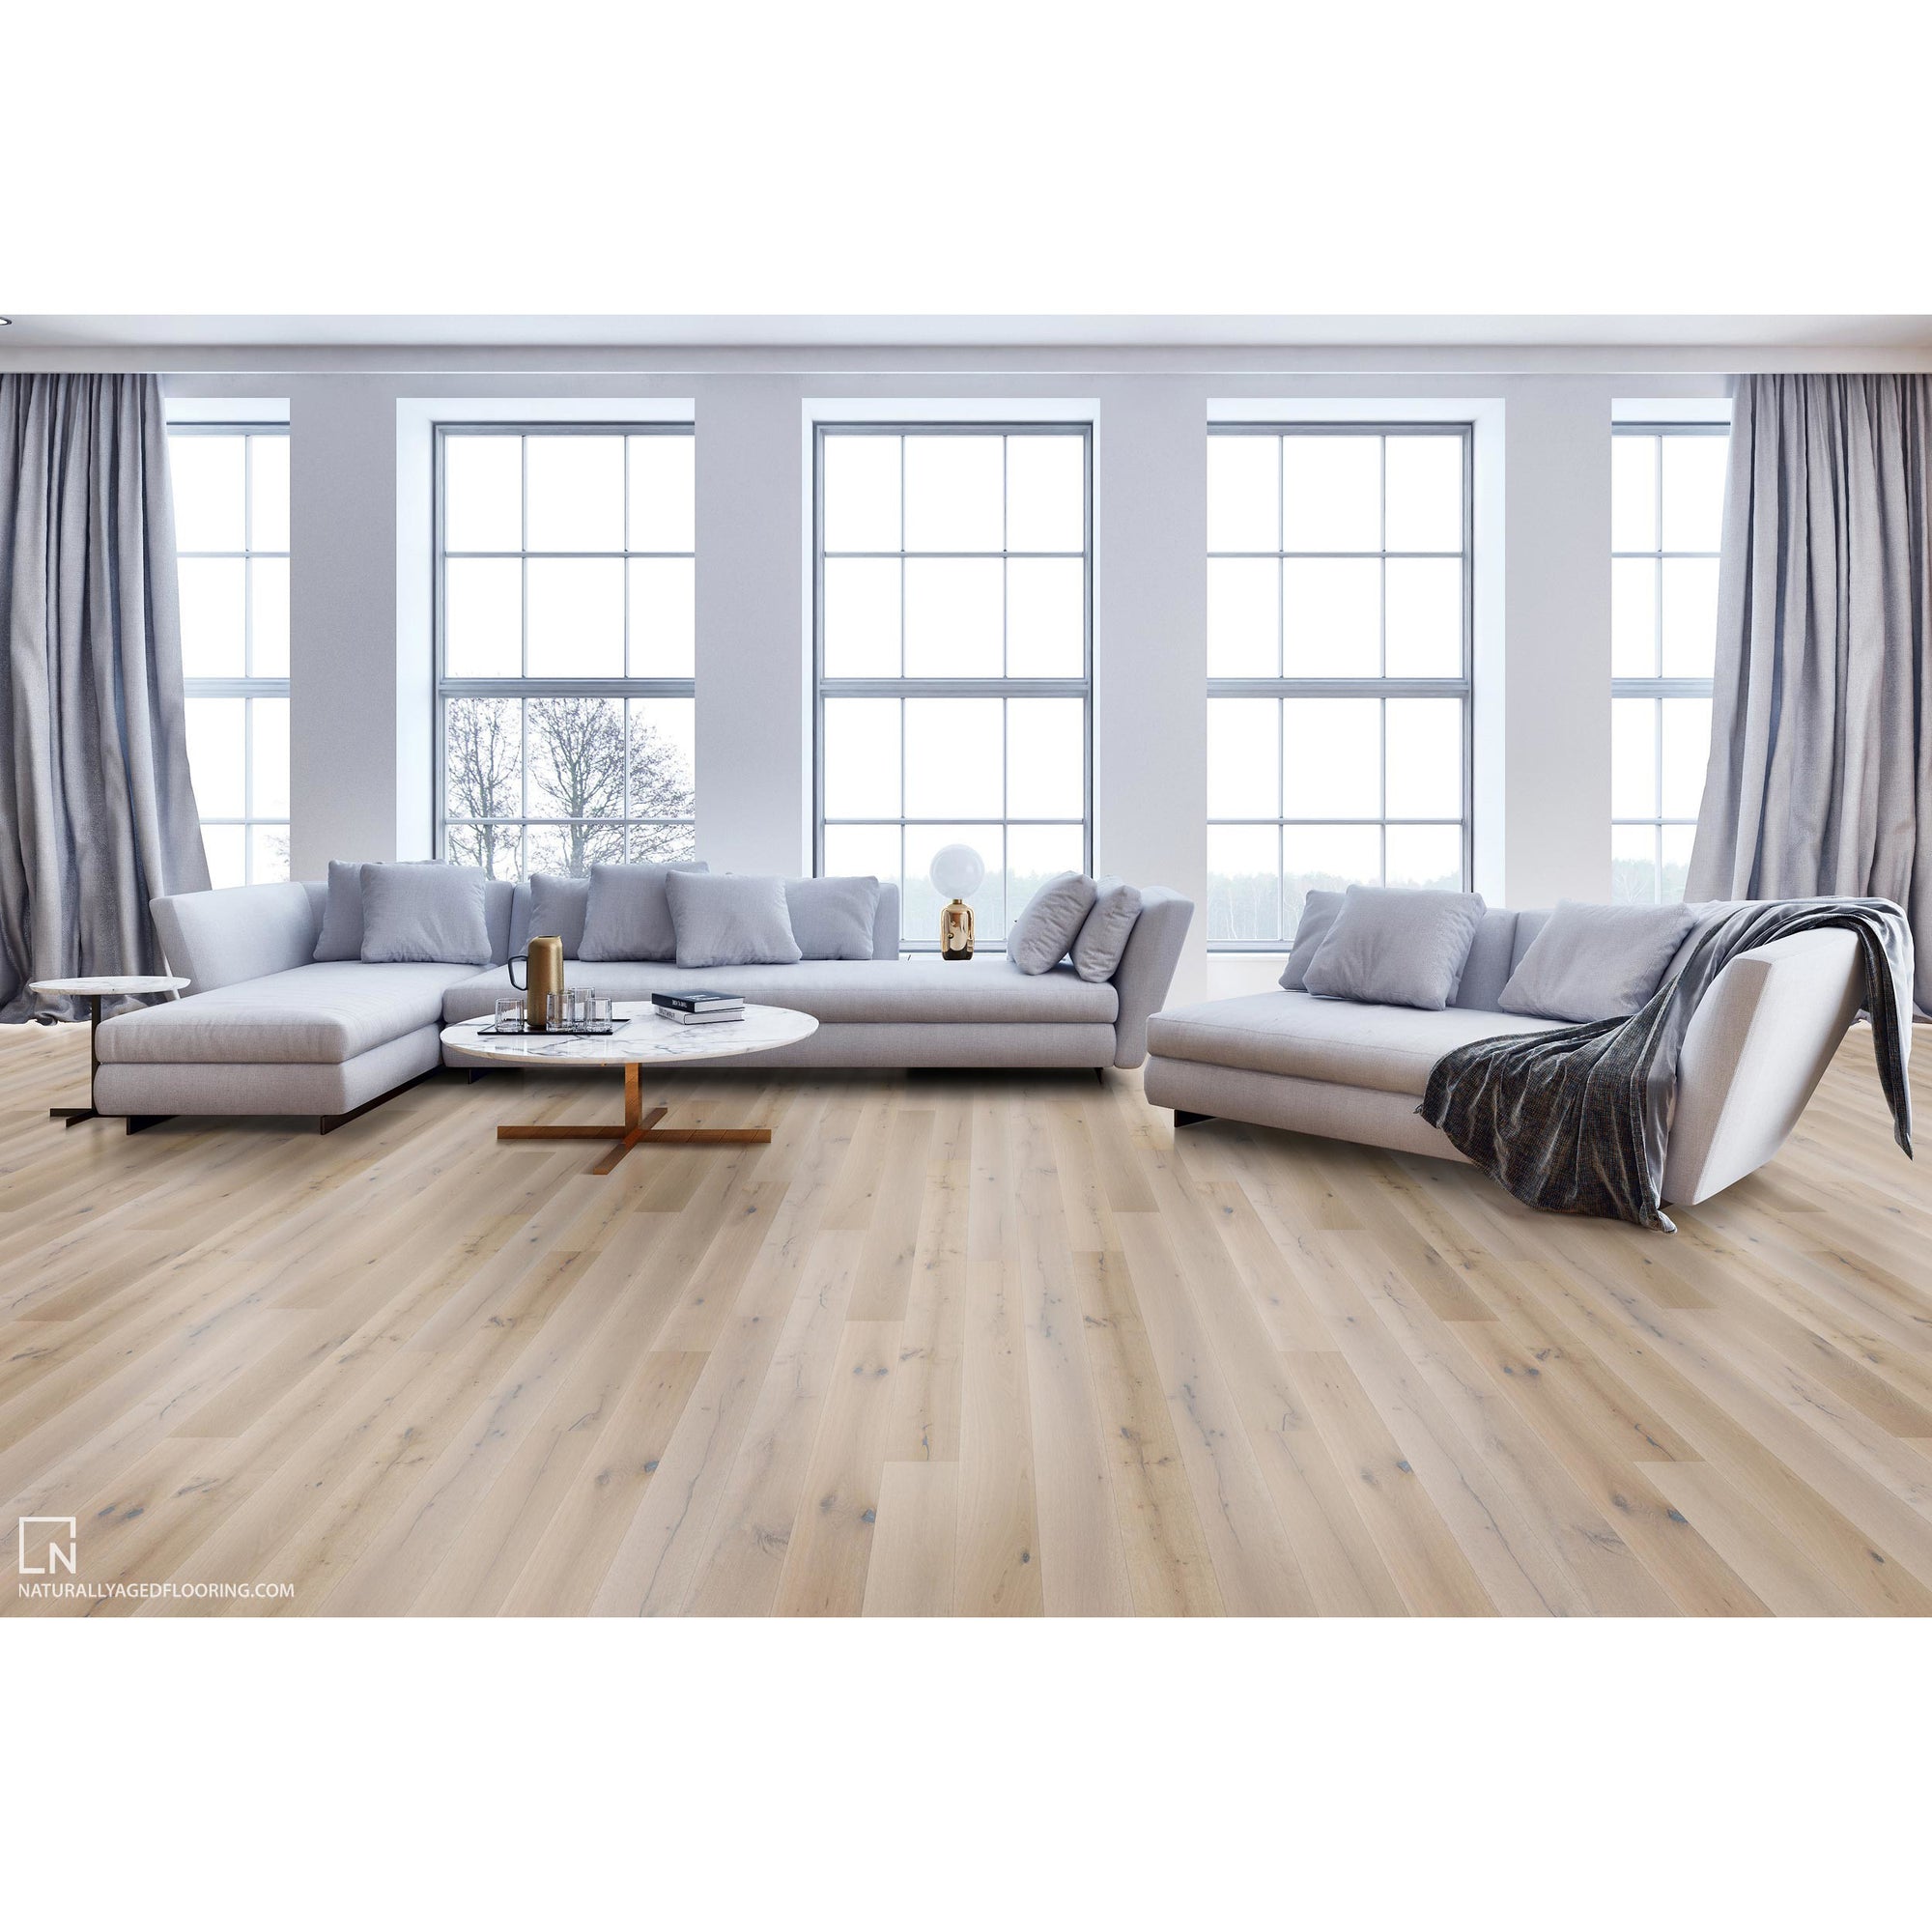 Naturally Aged Flooring - Pinnacle Collection - Zenith